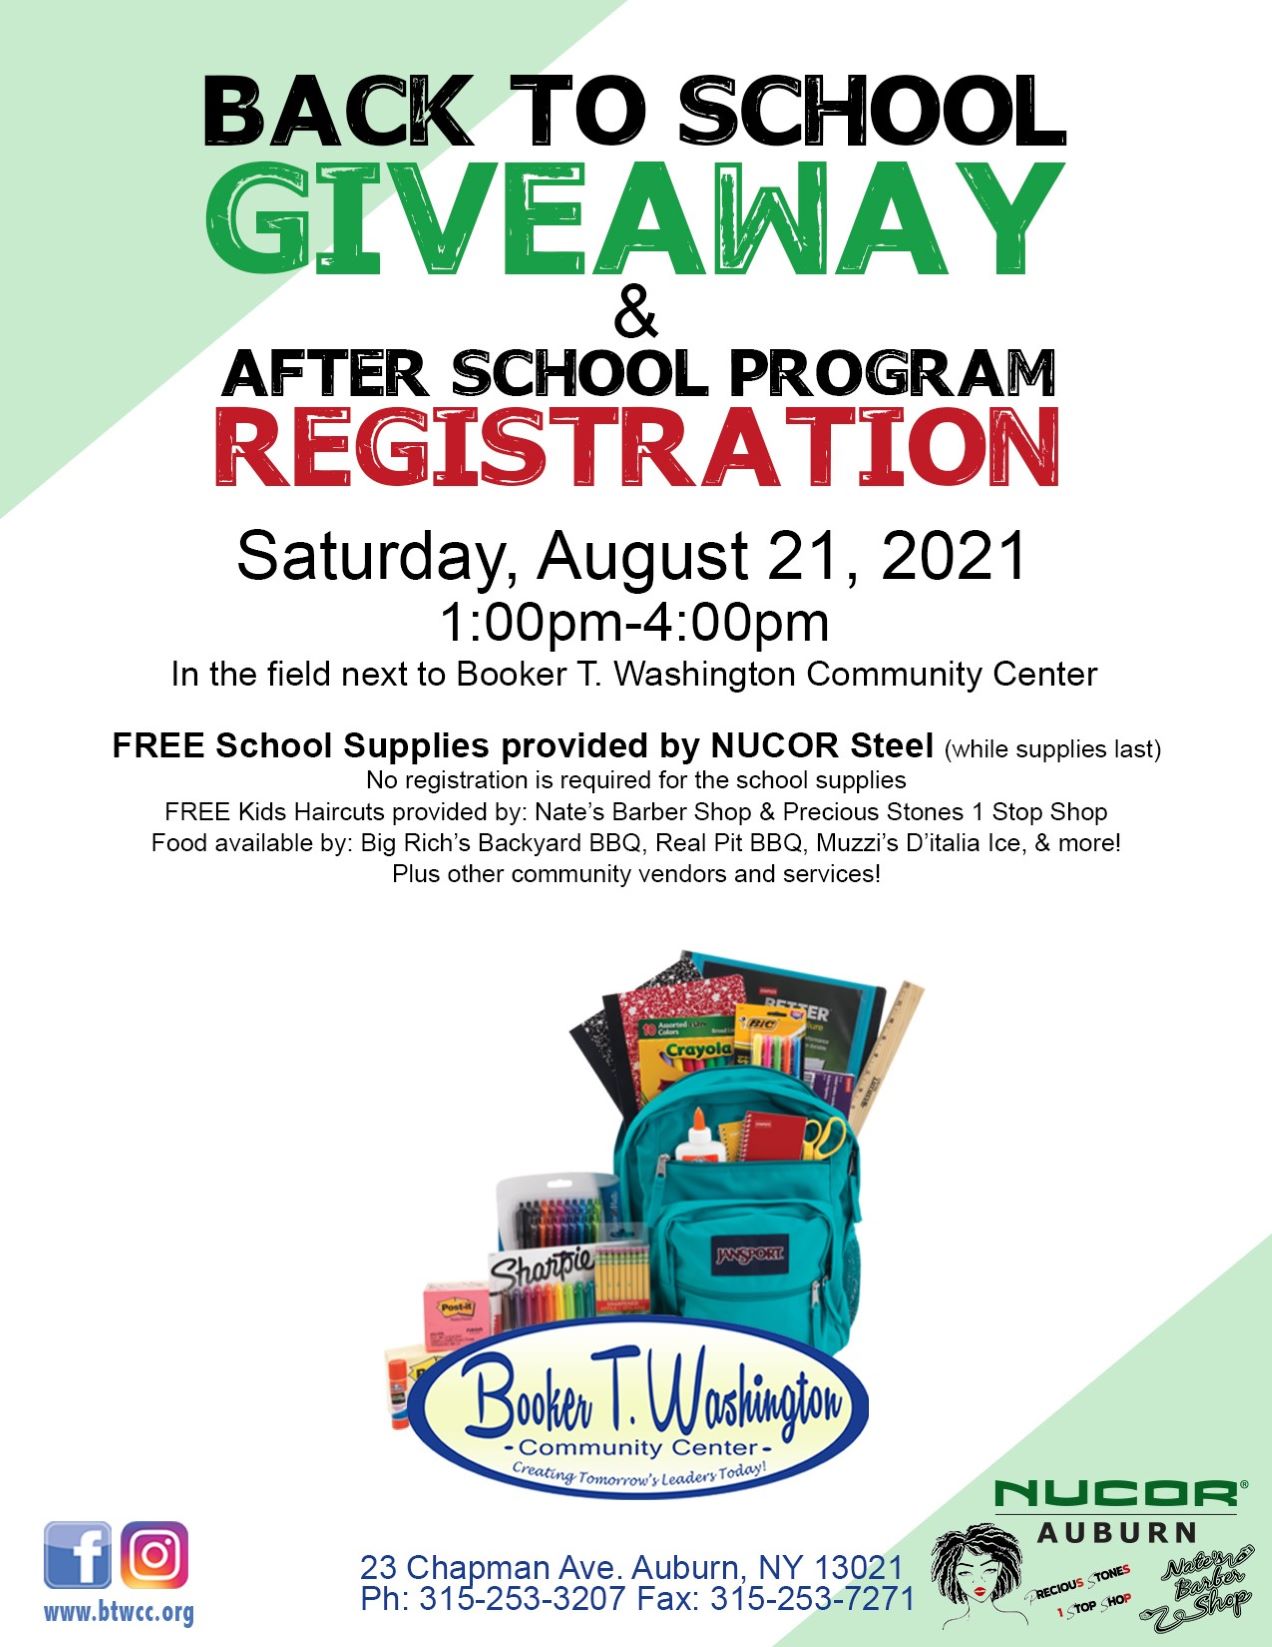 Back-to-School Supply Giveaway  Traverse Area District Library